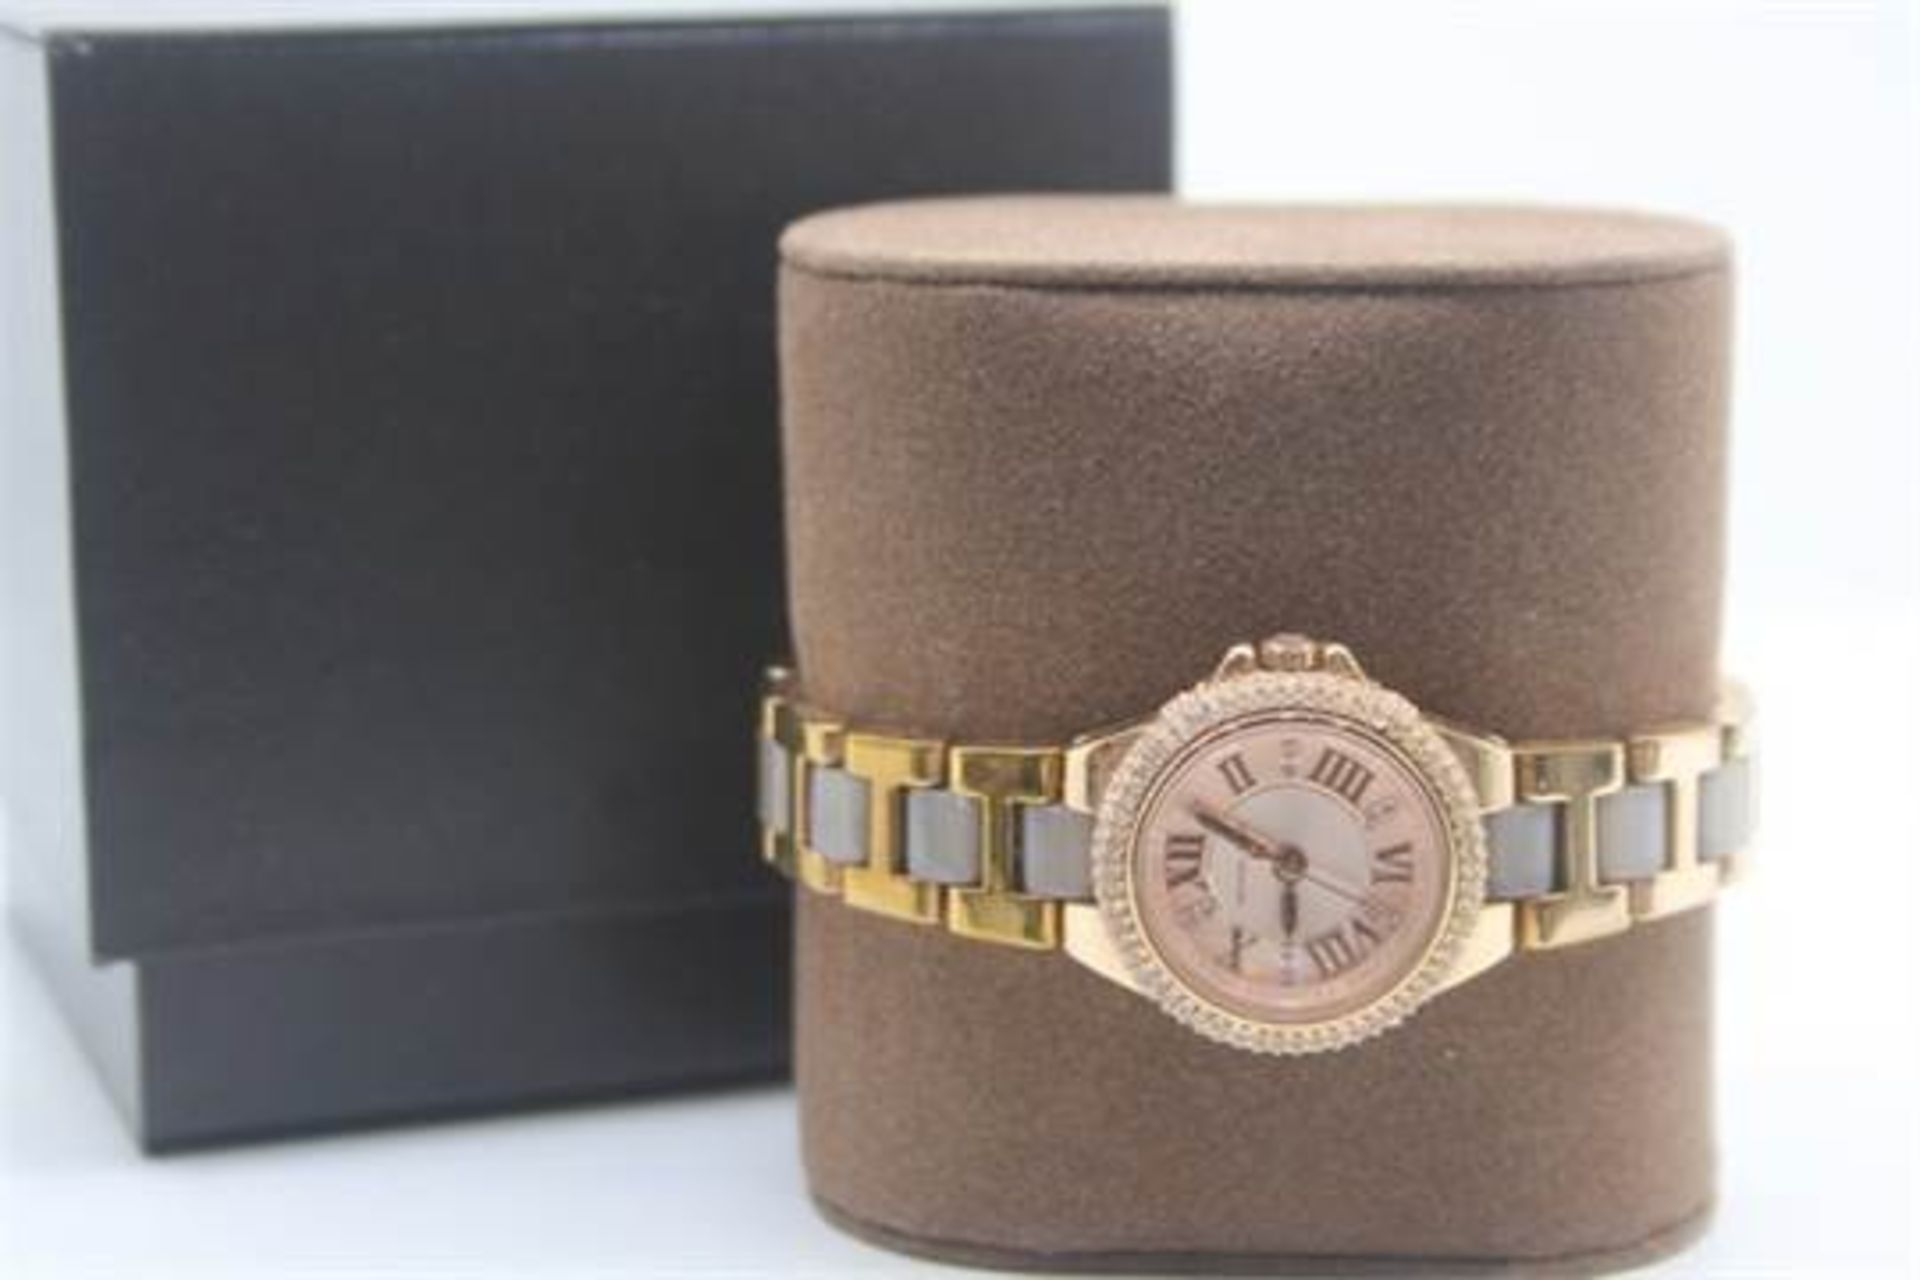 BOXED MICHEAL KORS LADIES WRIST WATCH RRP £225 (ADC-9100426)(10.04.16)